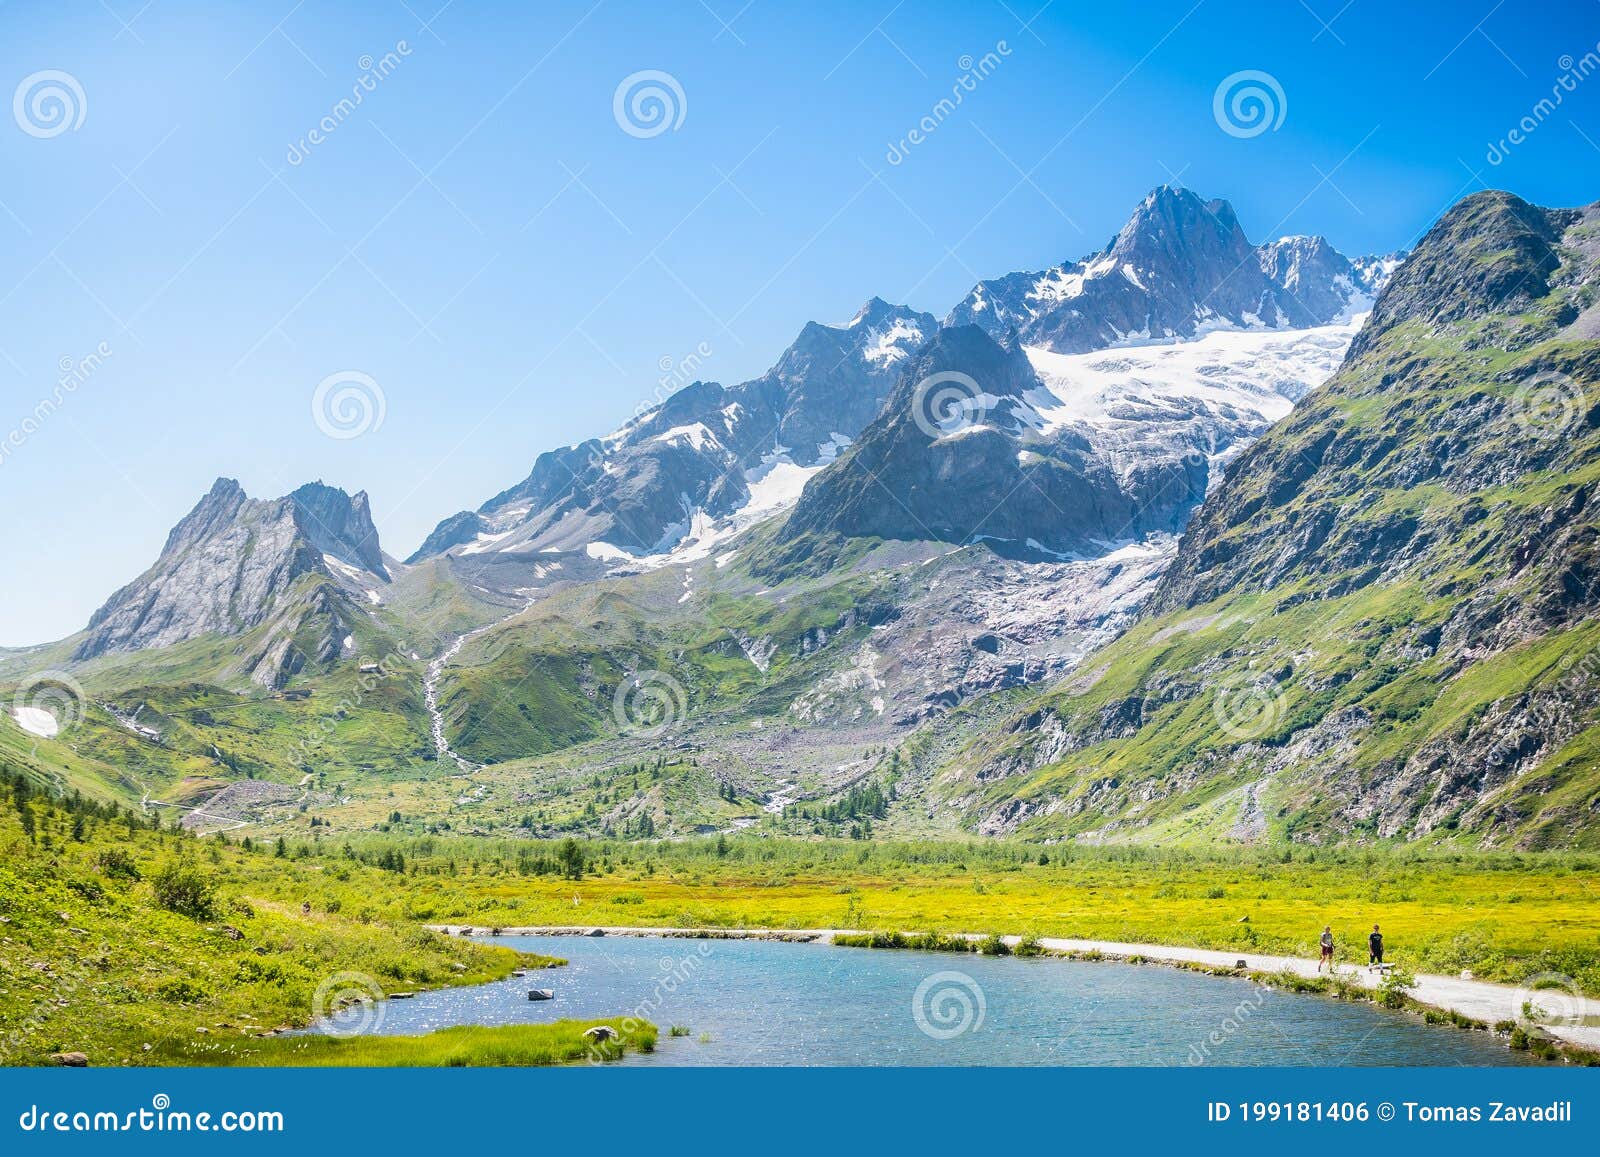 160 Combal Photos Free Royalty Free Stock Photos From Dreamstime